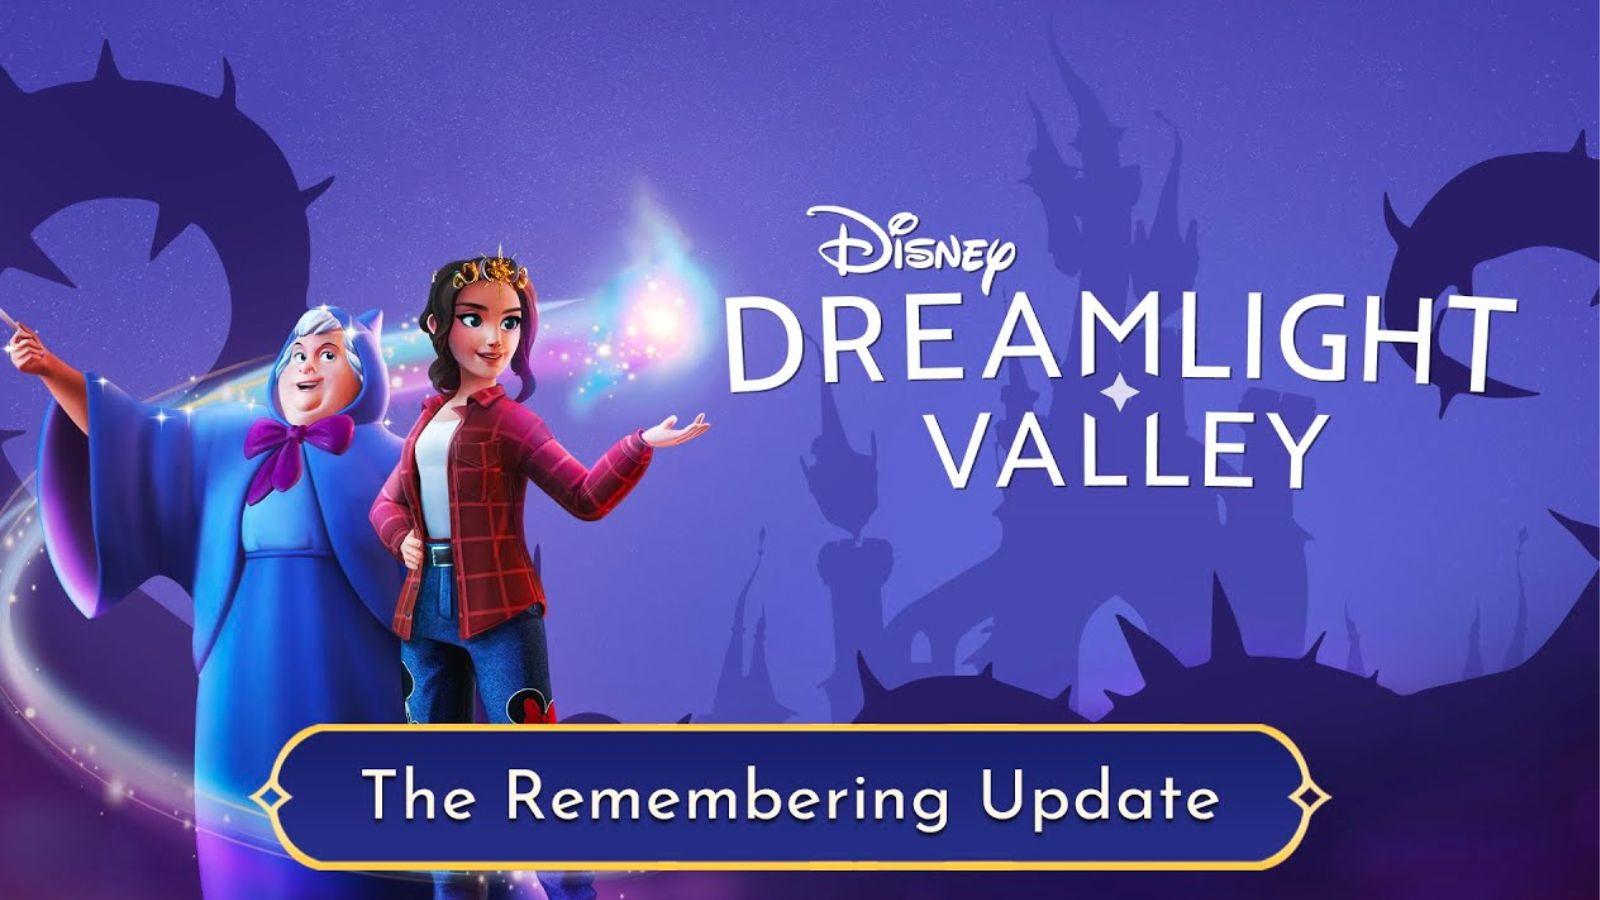 Patch notes for Remembering Disney Dreamlight Valley